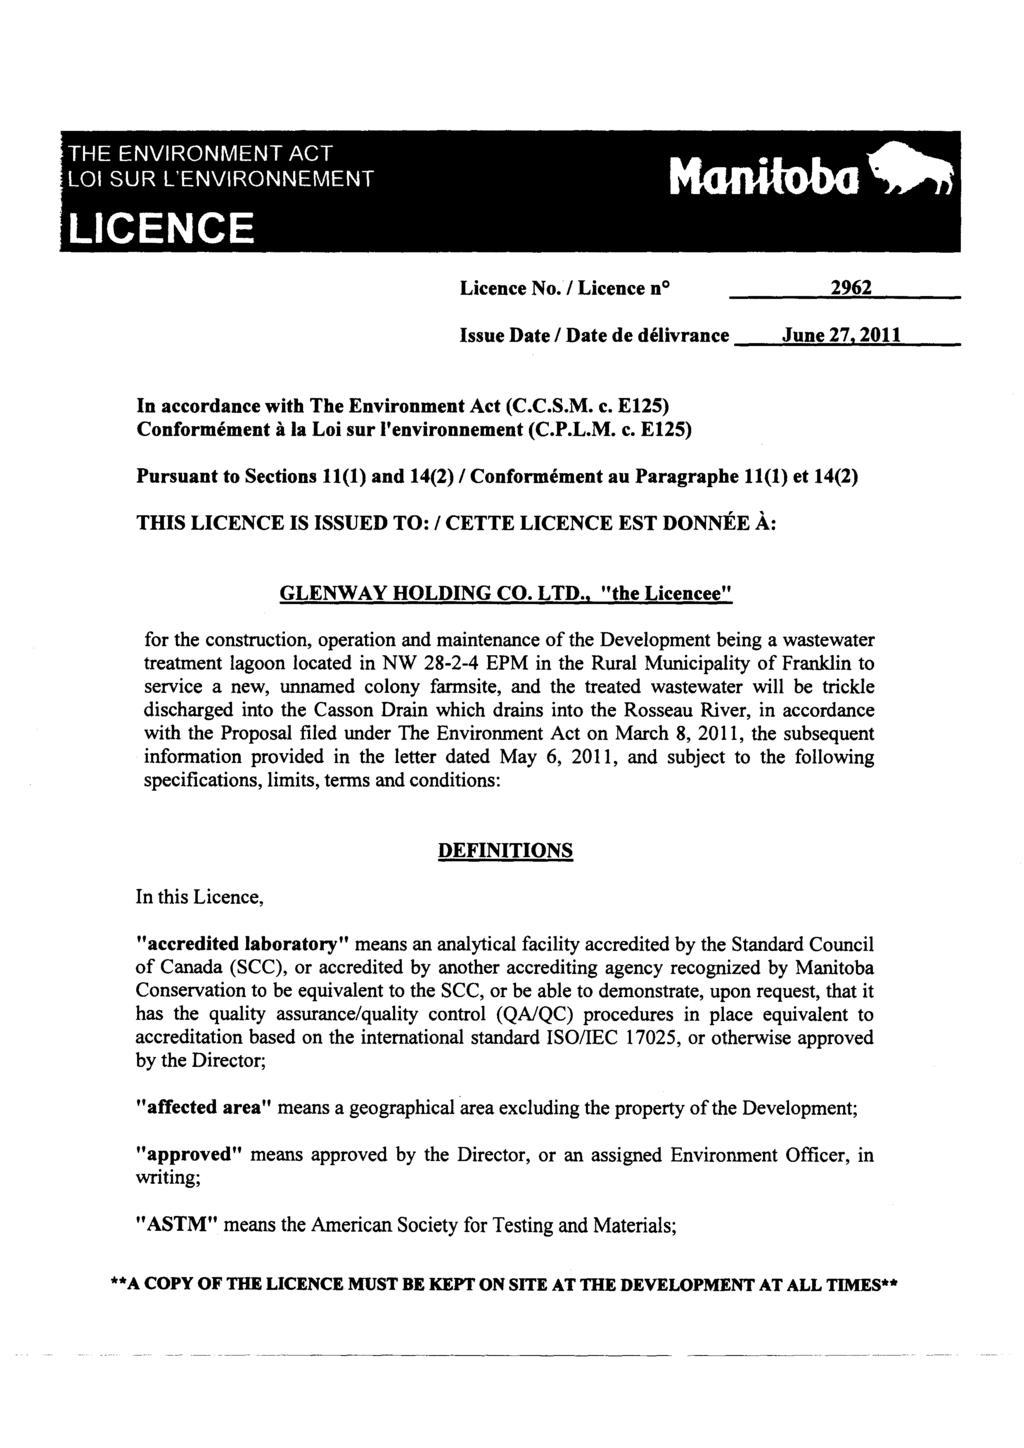 THE ENVIRONMENT ACT LO1 SUR L'ENVIRONNEMENT Licence No. / Licence n 2962 Issue Date / Date de delivrance June 27, 2011 In accordance with The Environment Act (C.C.S.M. c.